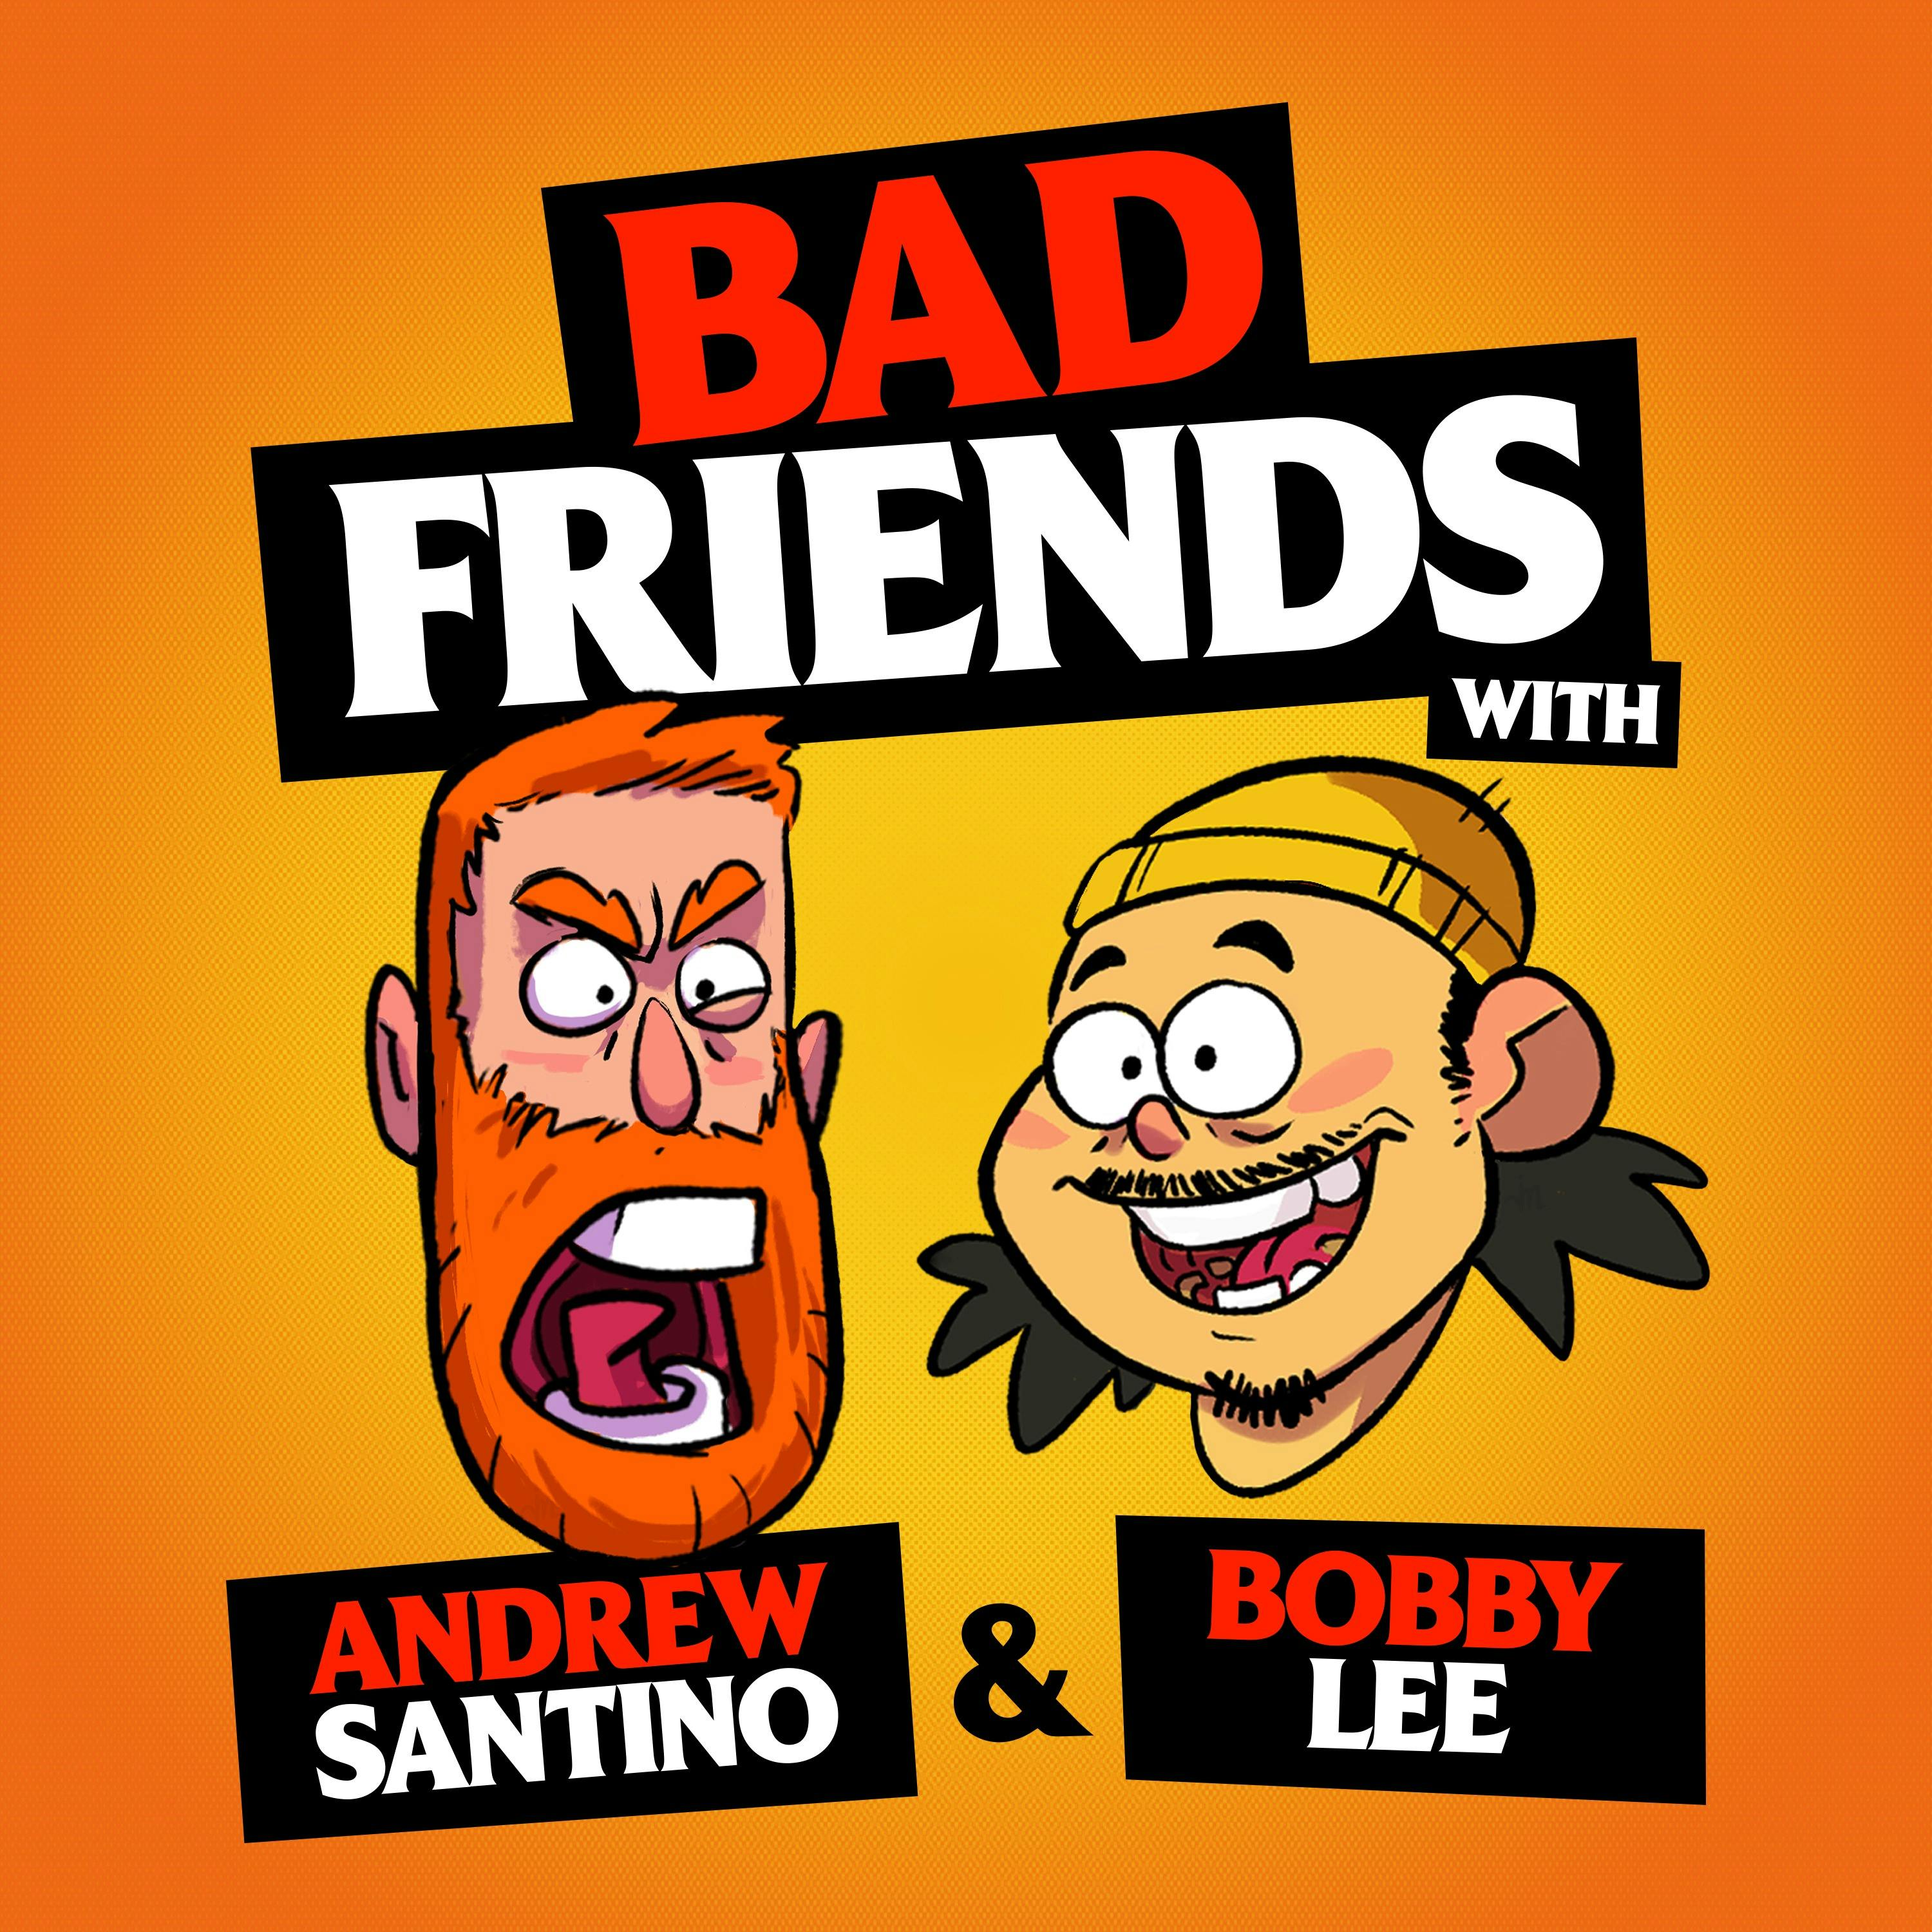 The White Cheeks by Andrew Santino and Bobby Lee